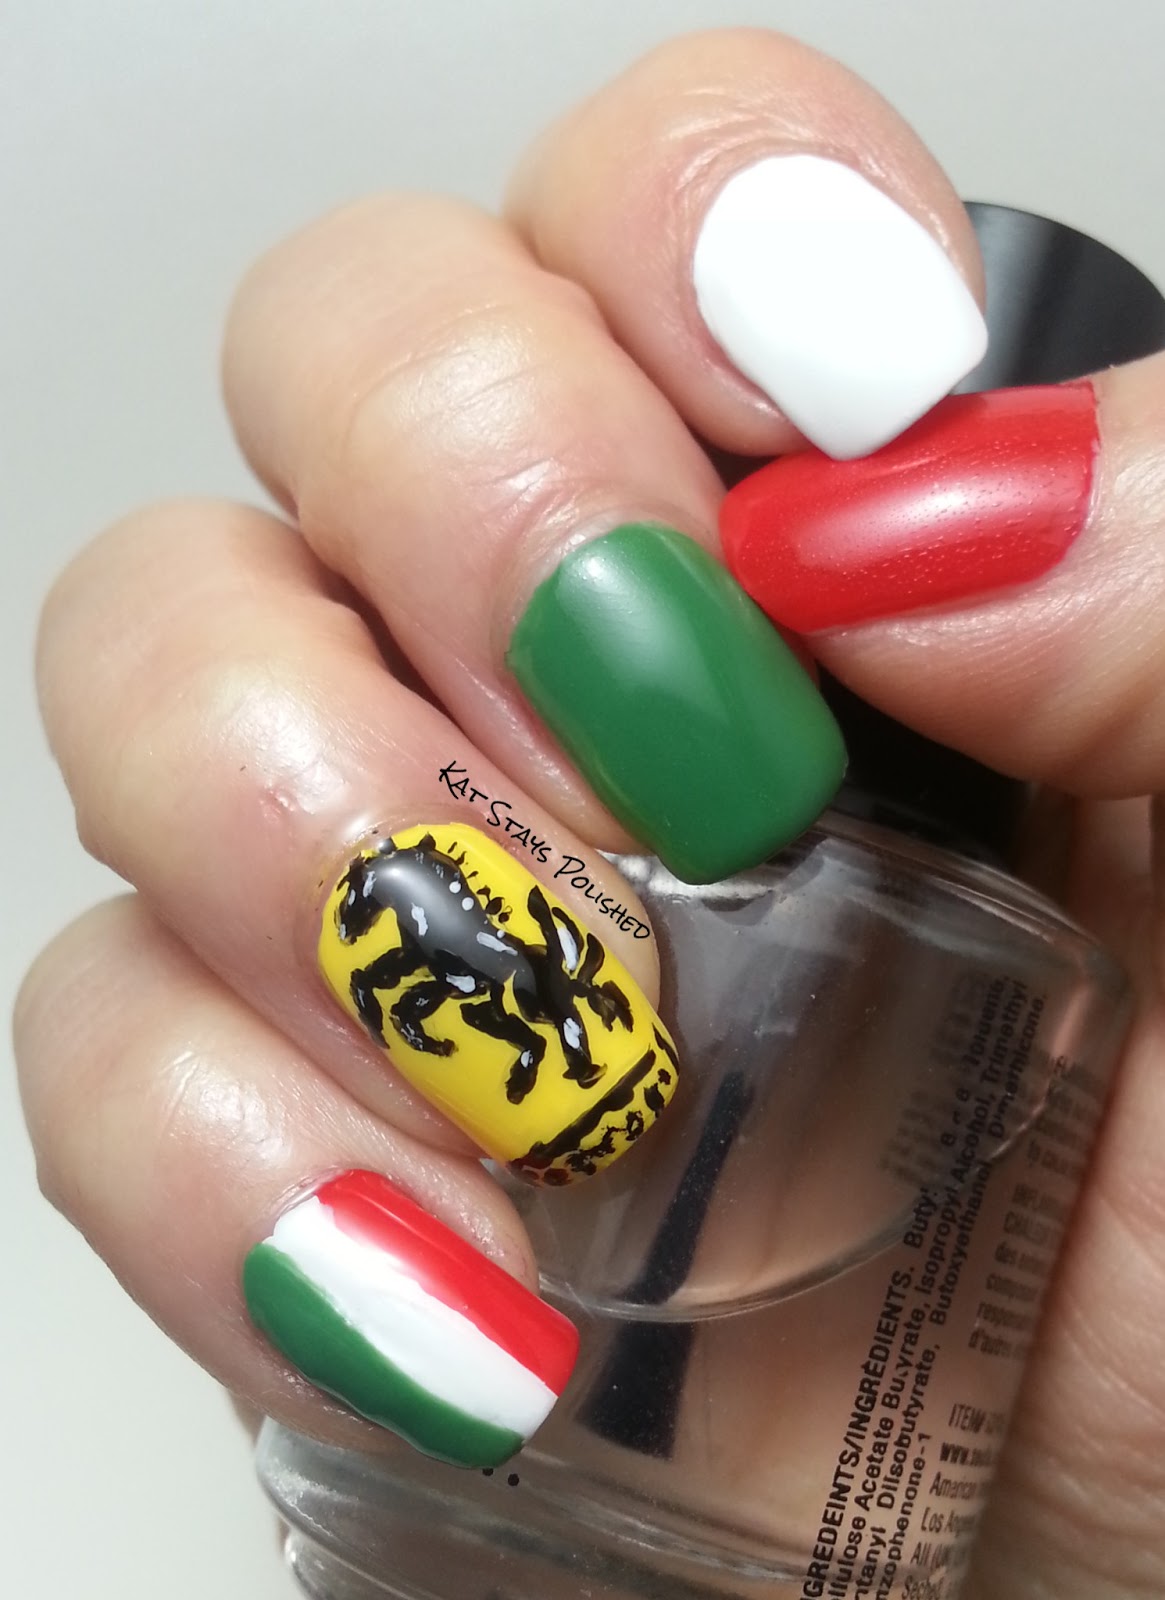 Kat Stays Polished | Beauty Blog with a Dash of Life: Ferrari Nail Art ...